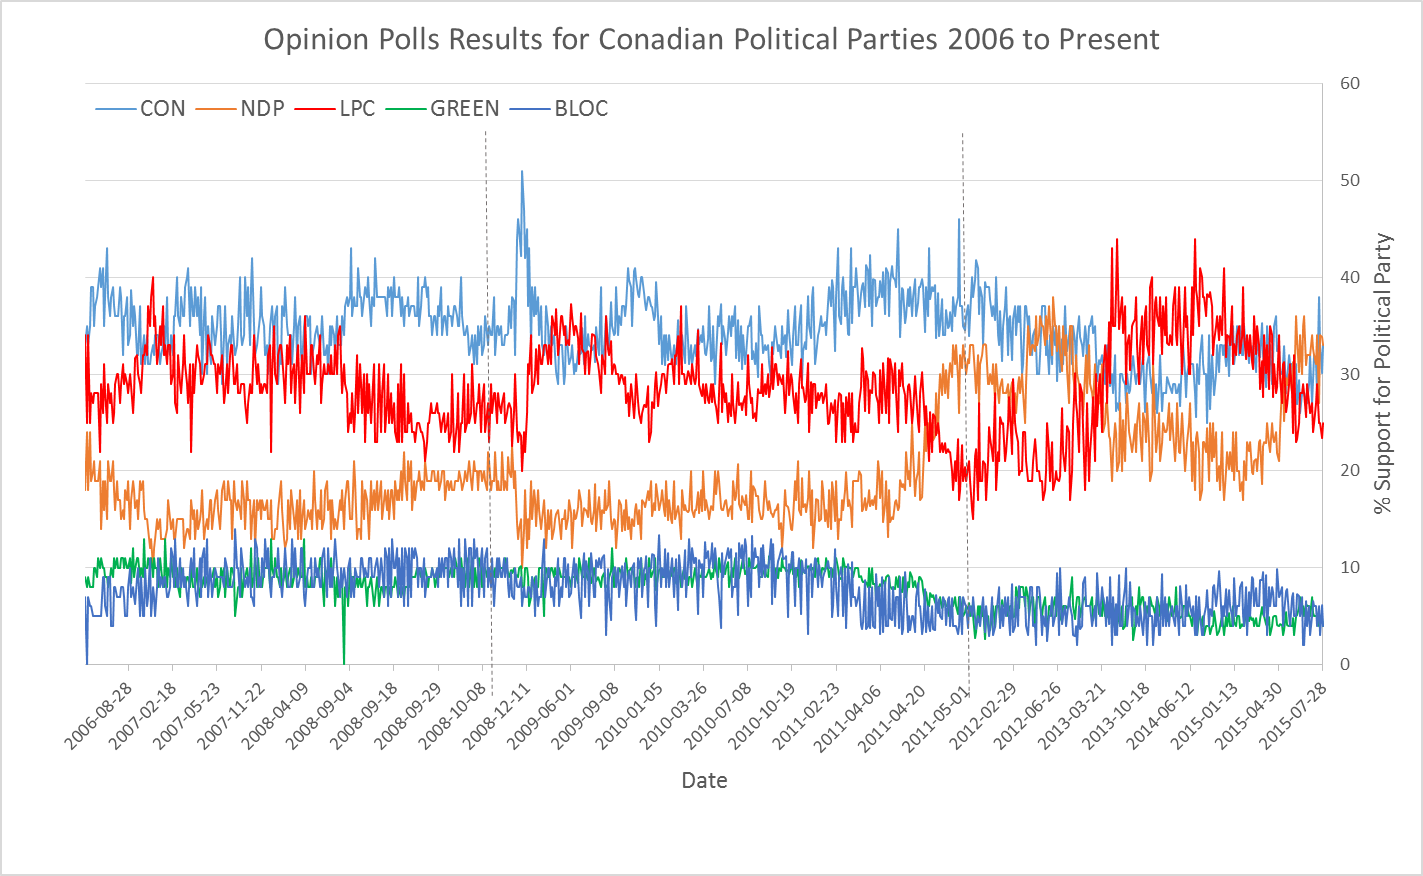 Patterns of Shifting Voter Support for Canadian Political Parties